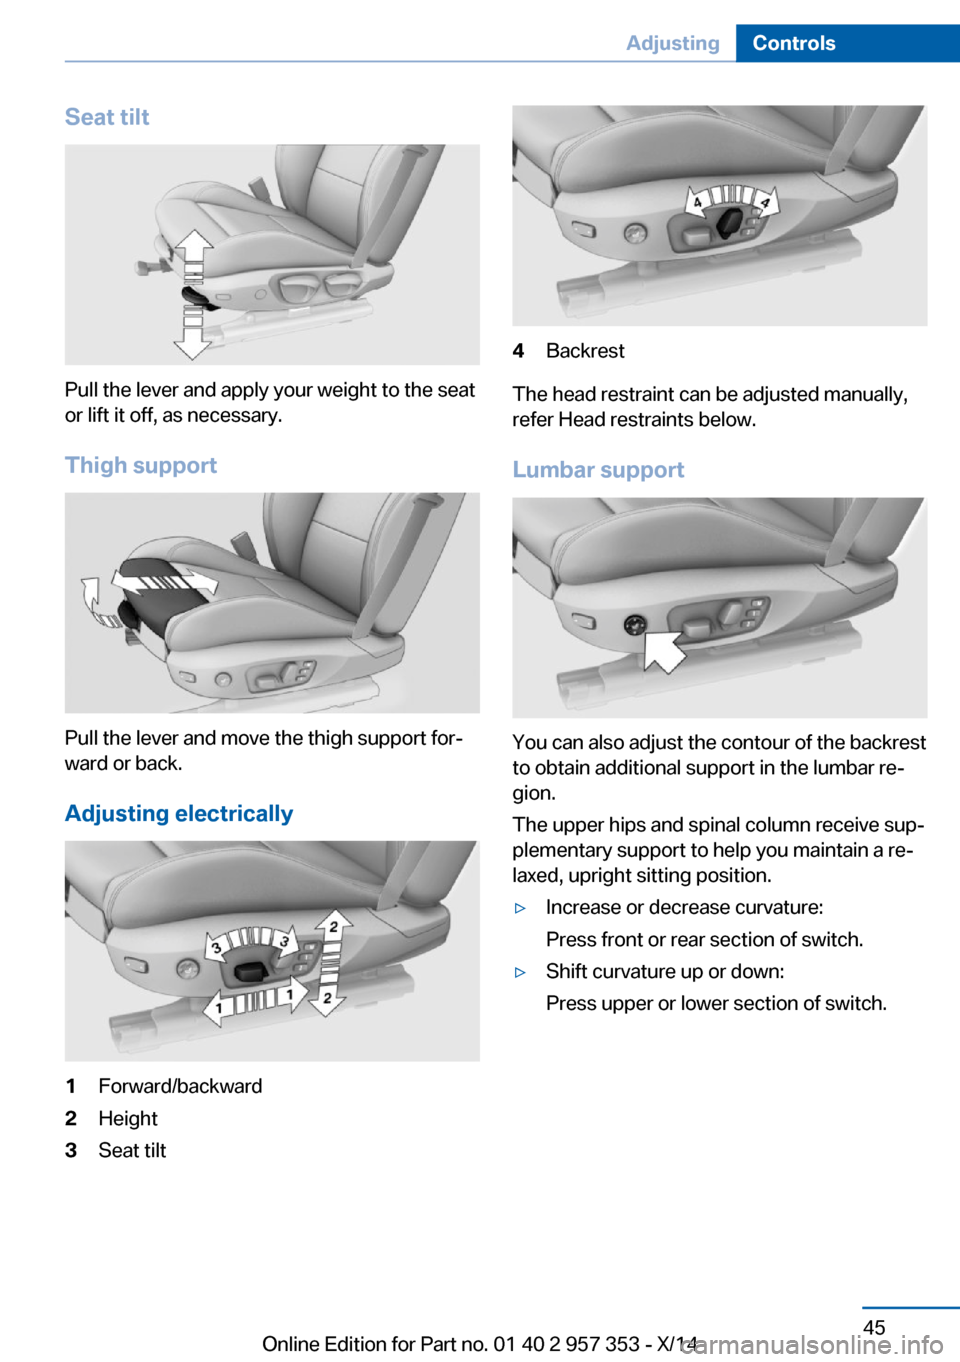 BMW X1 2014 E84 Owners Manual Seat tilt
Pull the lever and apply your weight to the seat
or lift it off, as necessary.
Thigh support
Pull the lever and move the thigh support for‐
ward or back.
Adjusting electrically
1Forward/ba